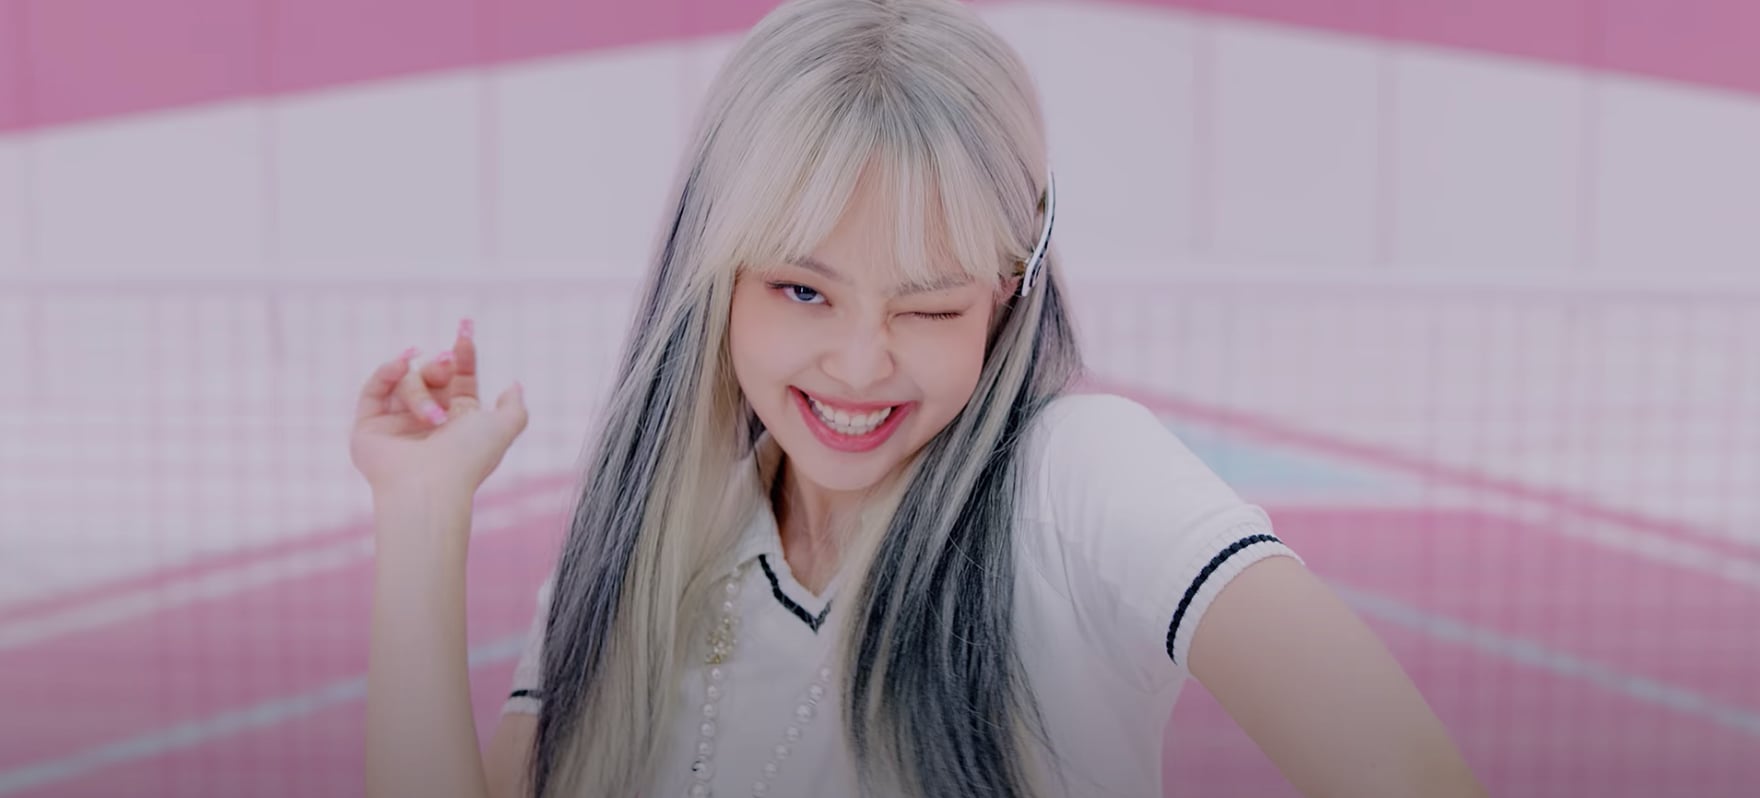 Jennie's Platinum Blond and Black Hair Color | Blink and You'll Miss the  Many Beauty Looks From Blackpink and Selena Gomez's 